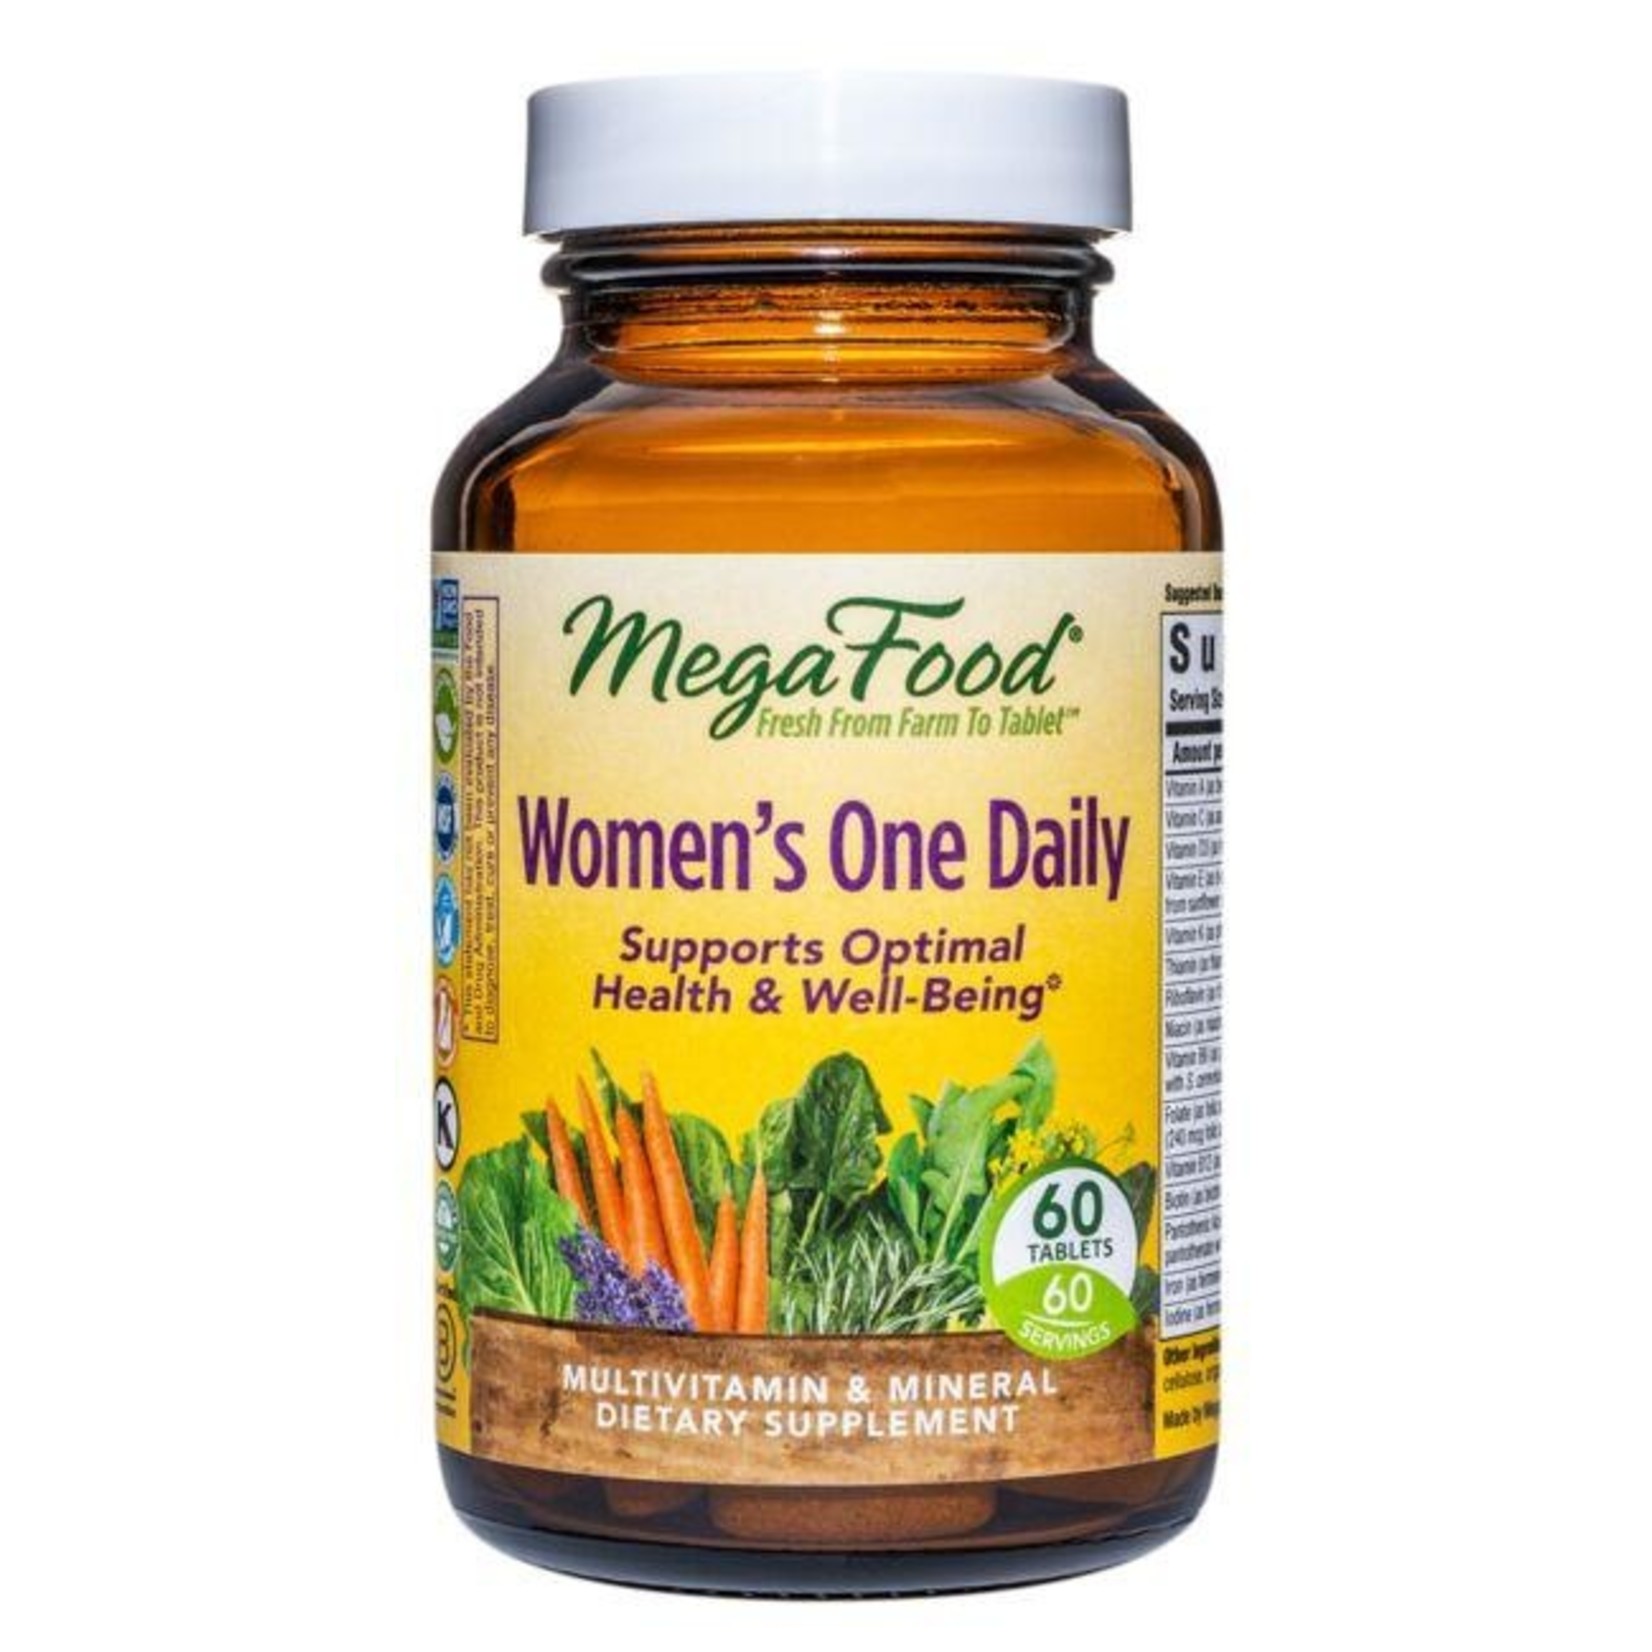 Megafood Megafood - Women’s One Daily - 60 Tablets